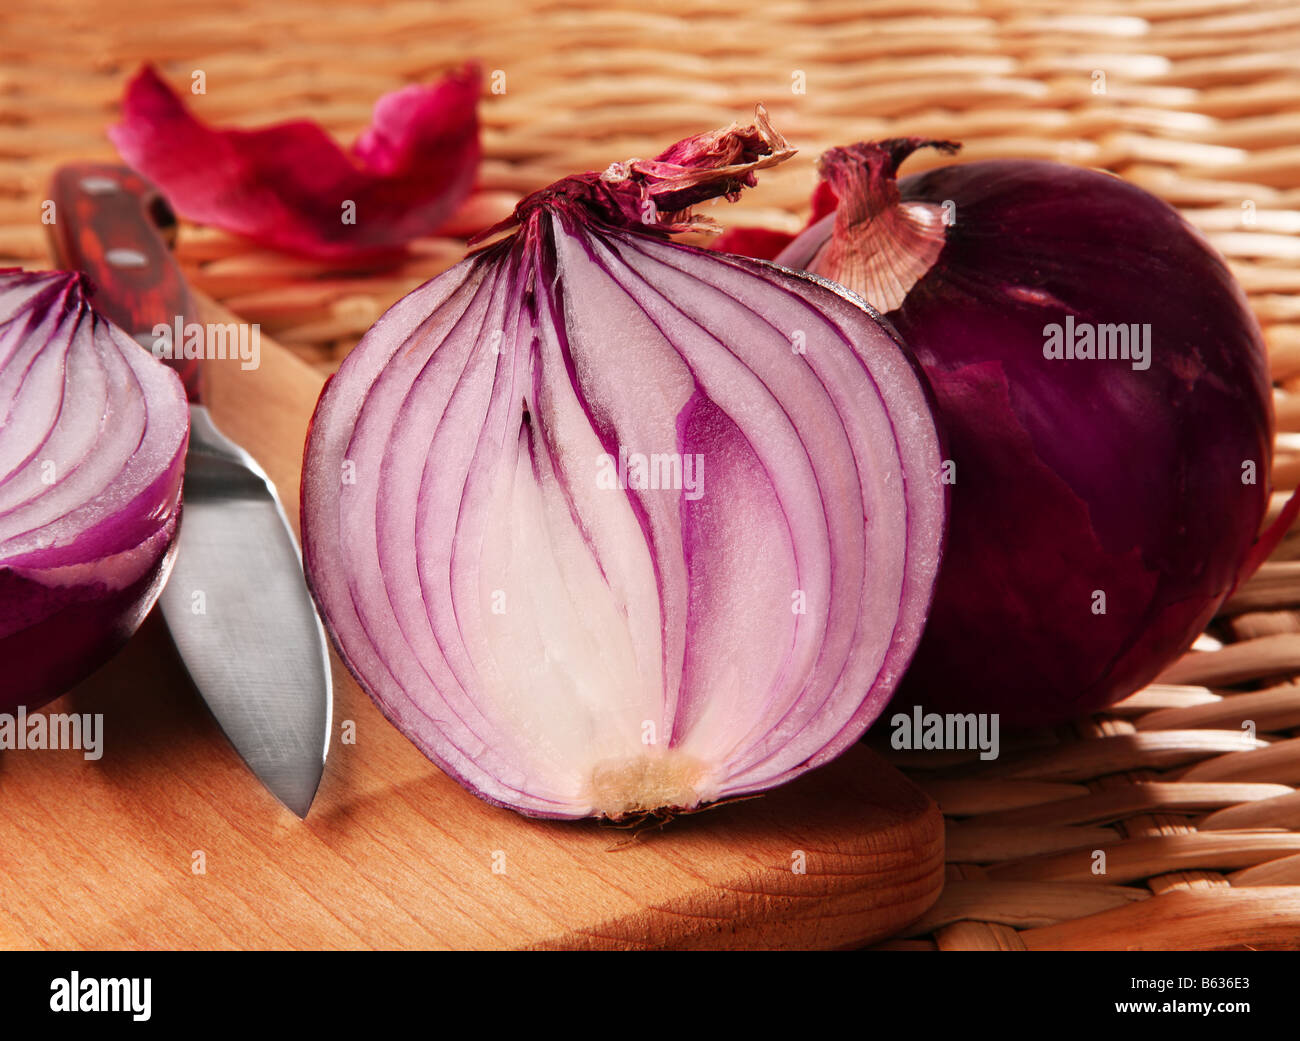 Violet ripe onion detail with slice on background Stock Photo